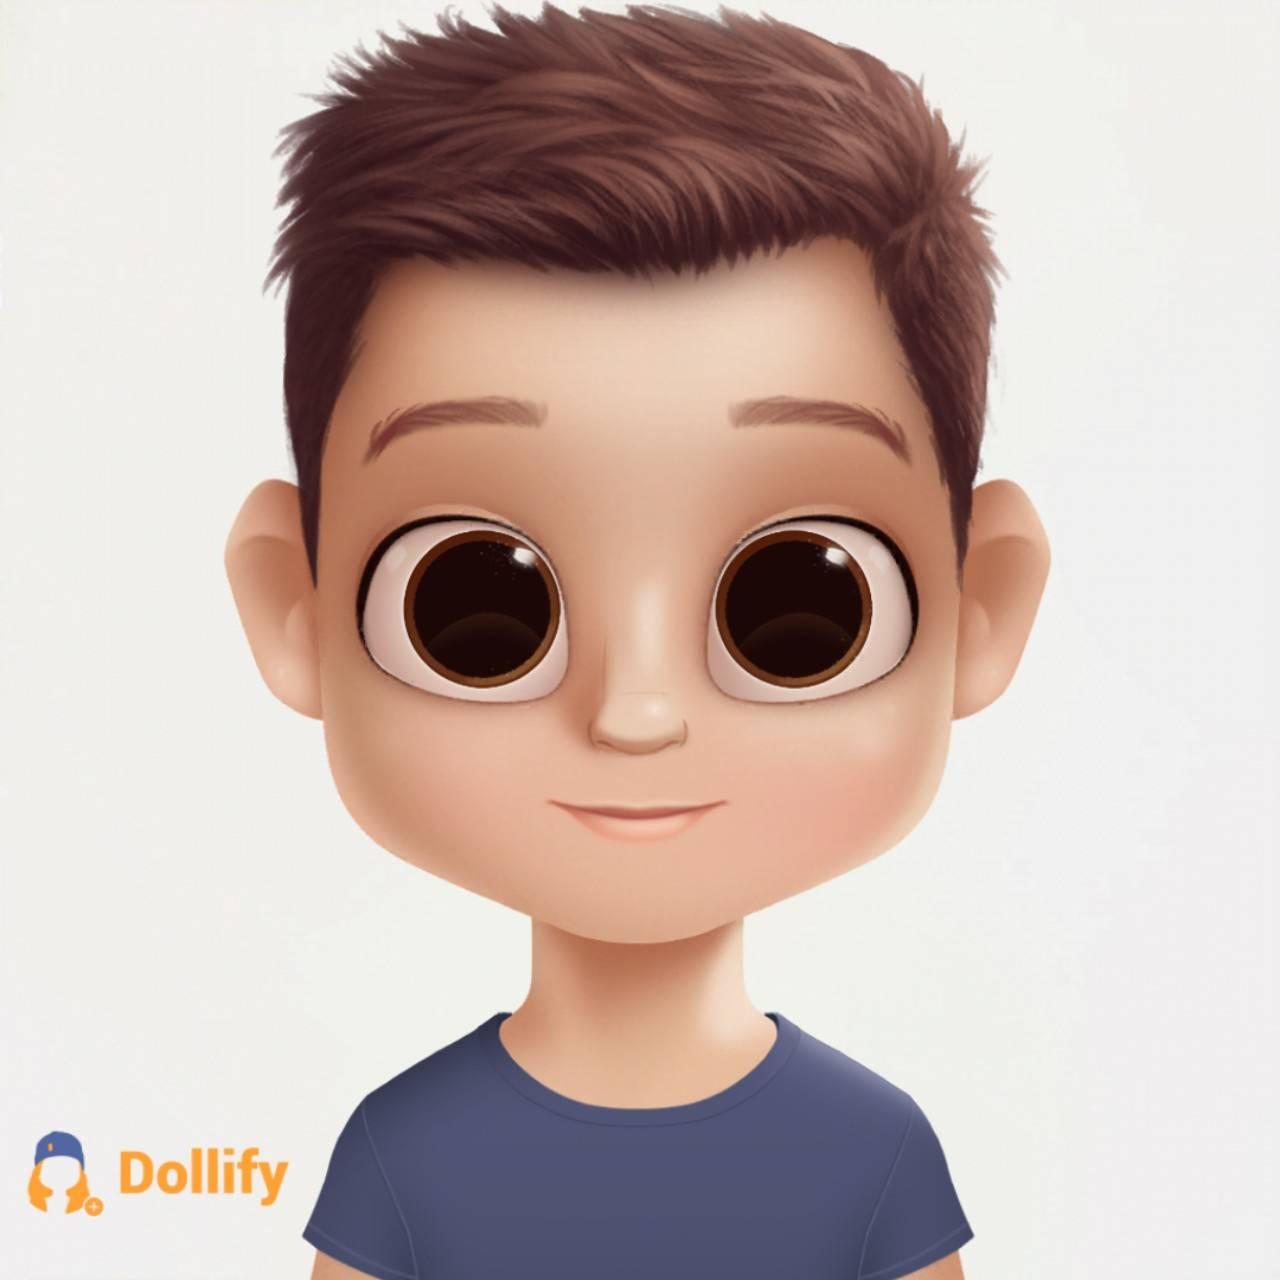 Have Fun Customizing Your Own Digital Avatar with Dollify Wallpaper